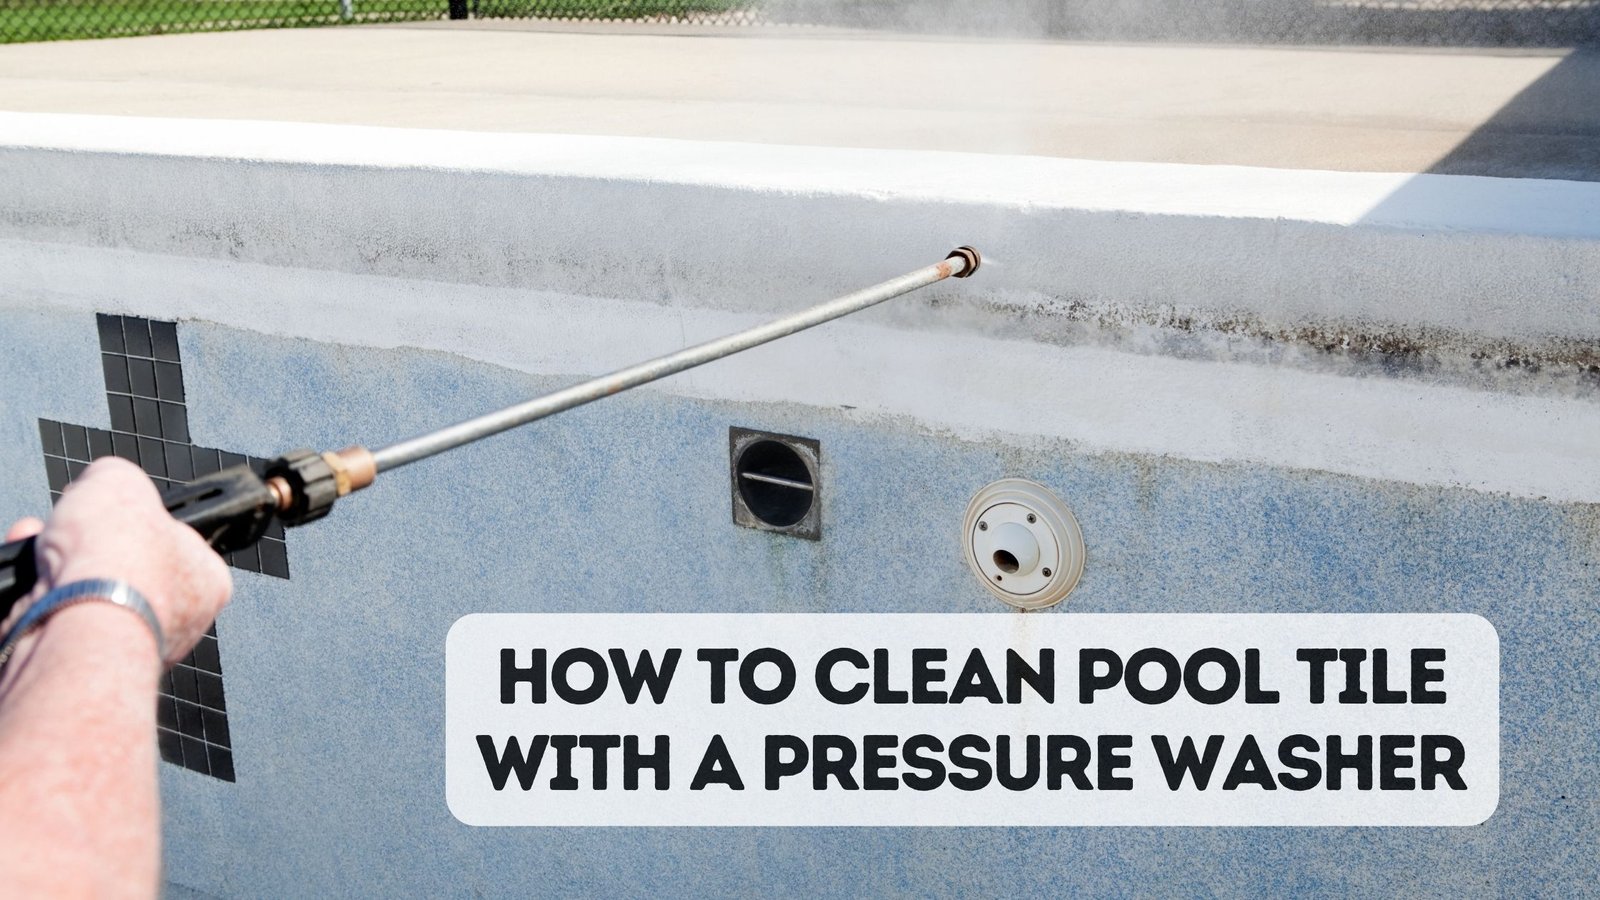 How to Clean Pool Tile with a Pressure Washer